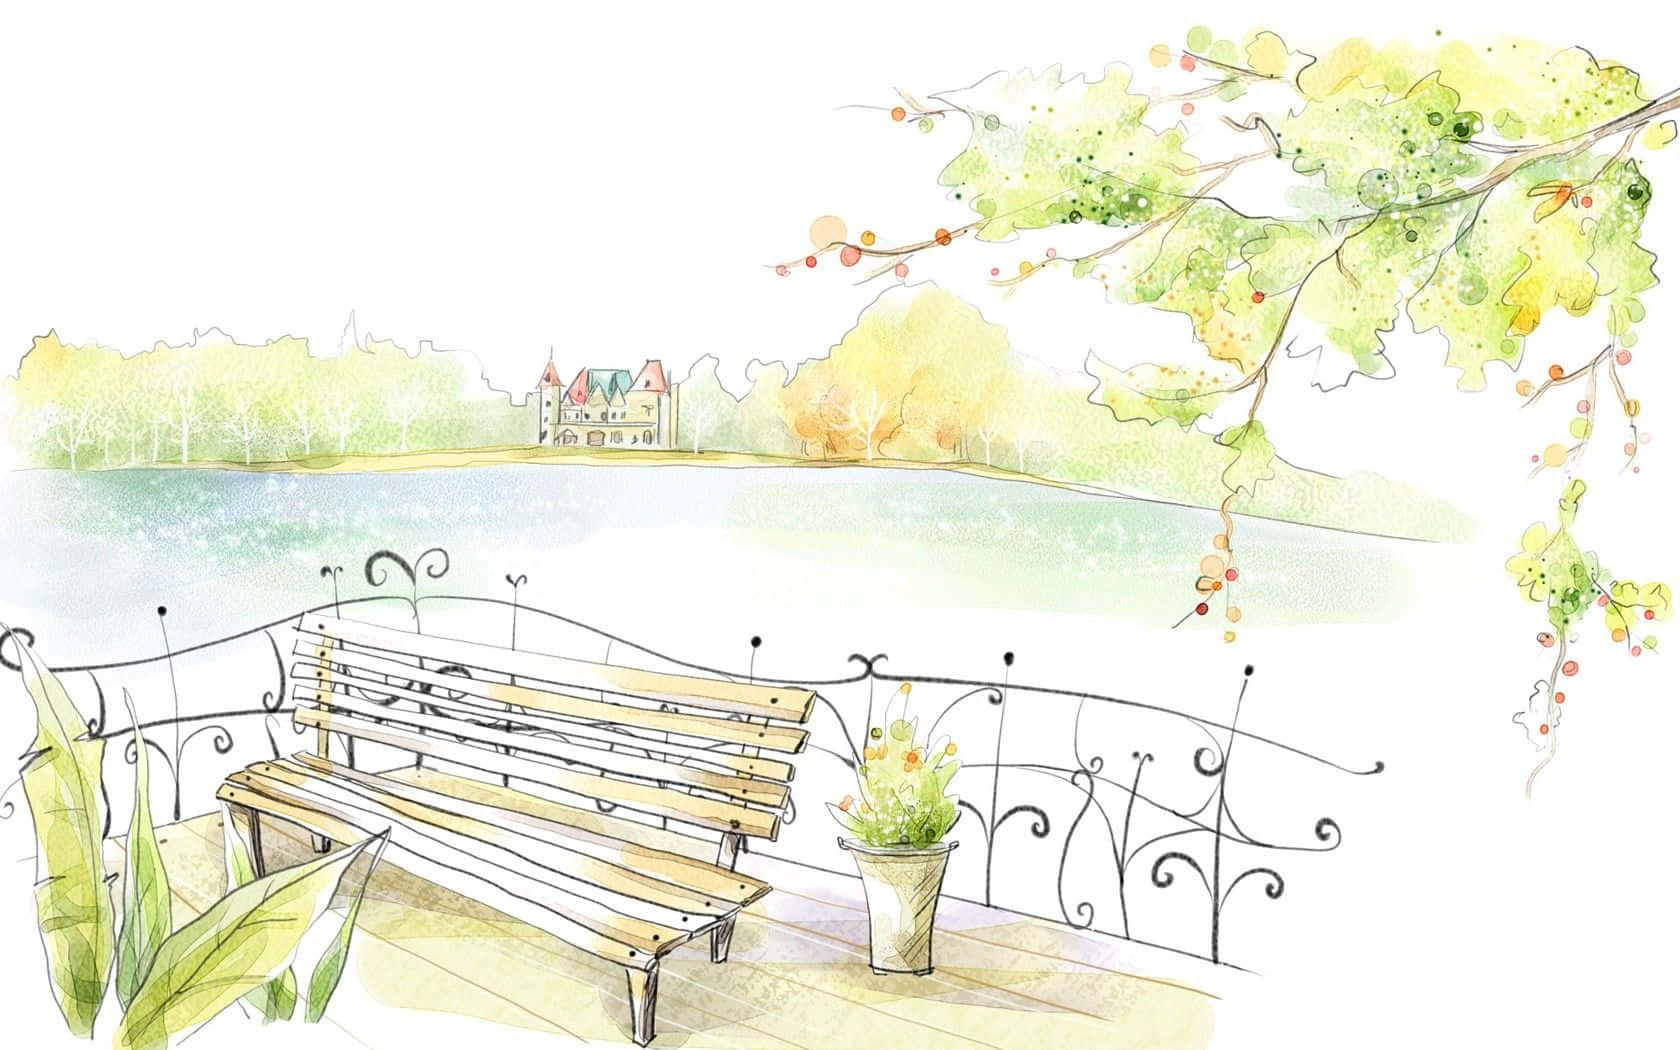 Watercolor Sketch Of A Bench On A Balcony Overlooking A Lake